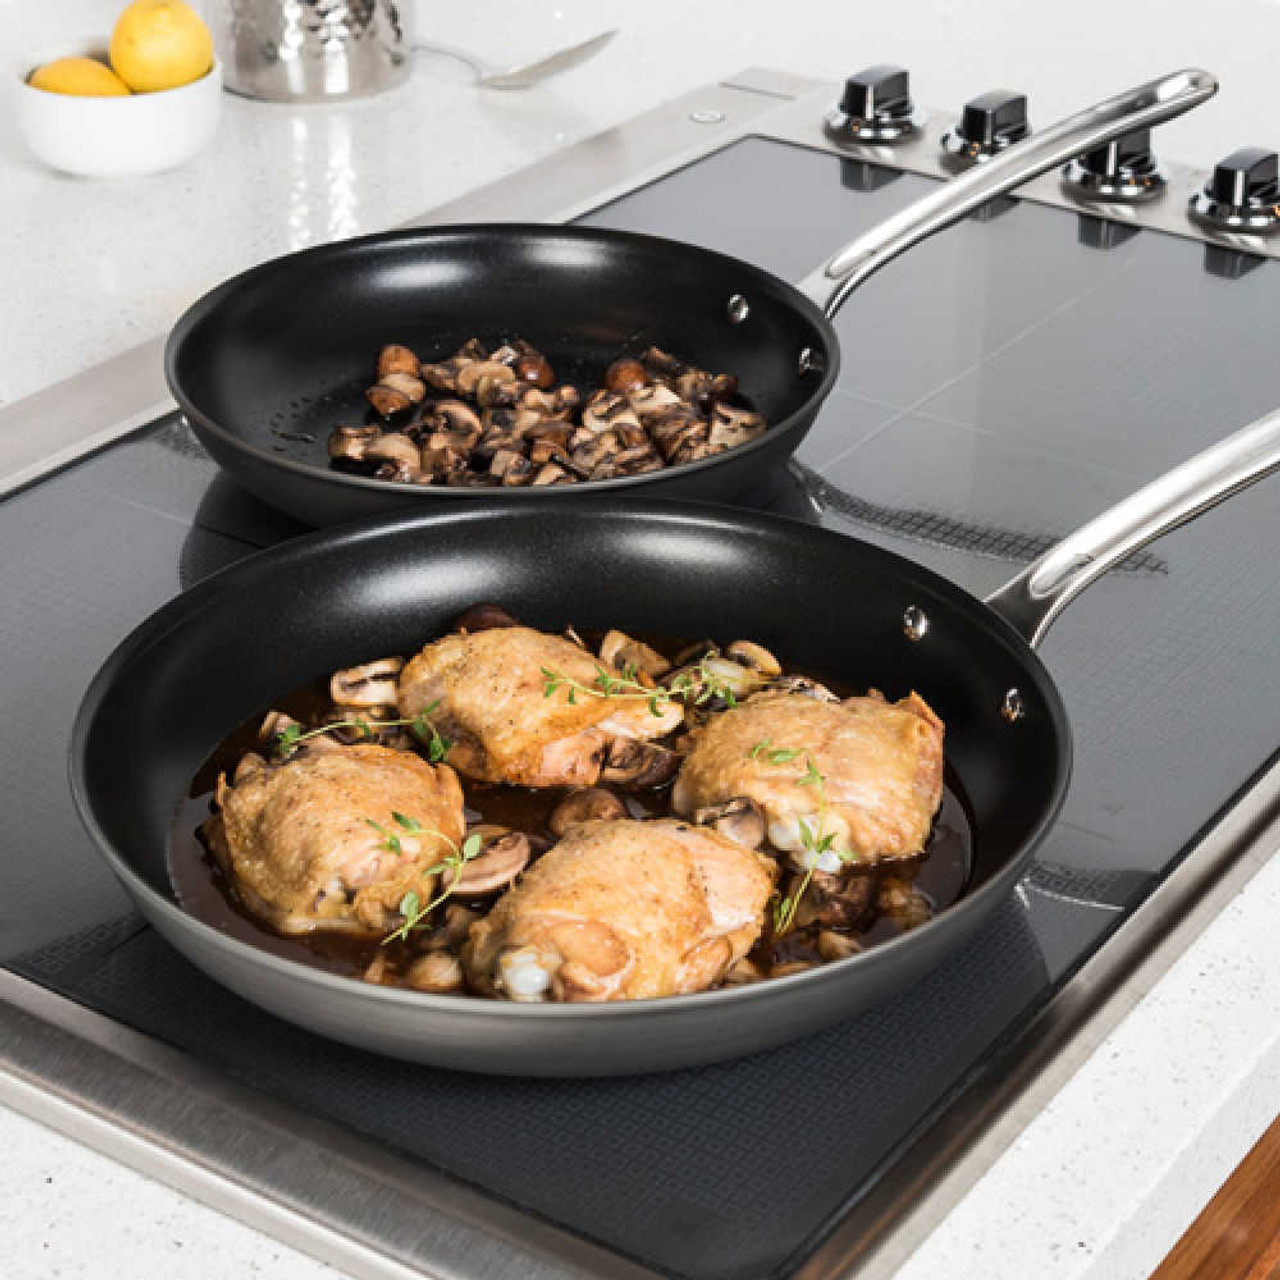 https://cdn11.bigcommerce.com/s-hccytny0od/images/stencil/1280x1280/products/4821/19668/Viking_Hard_Anodized_Nonstick_2-Piece_Fry_Pan_Set_1__60042.1656021148.jpg?c=2?imbypass=on